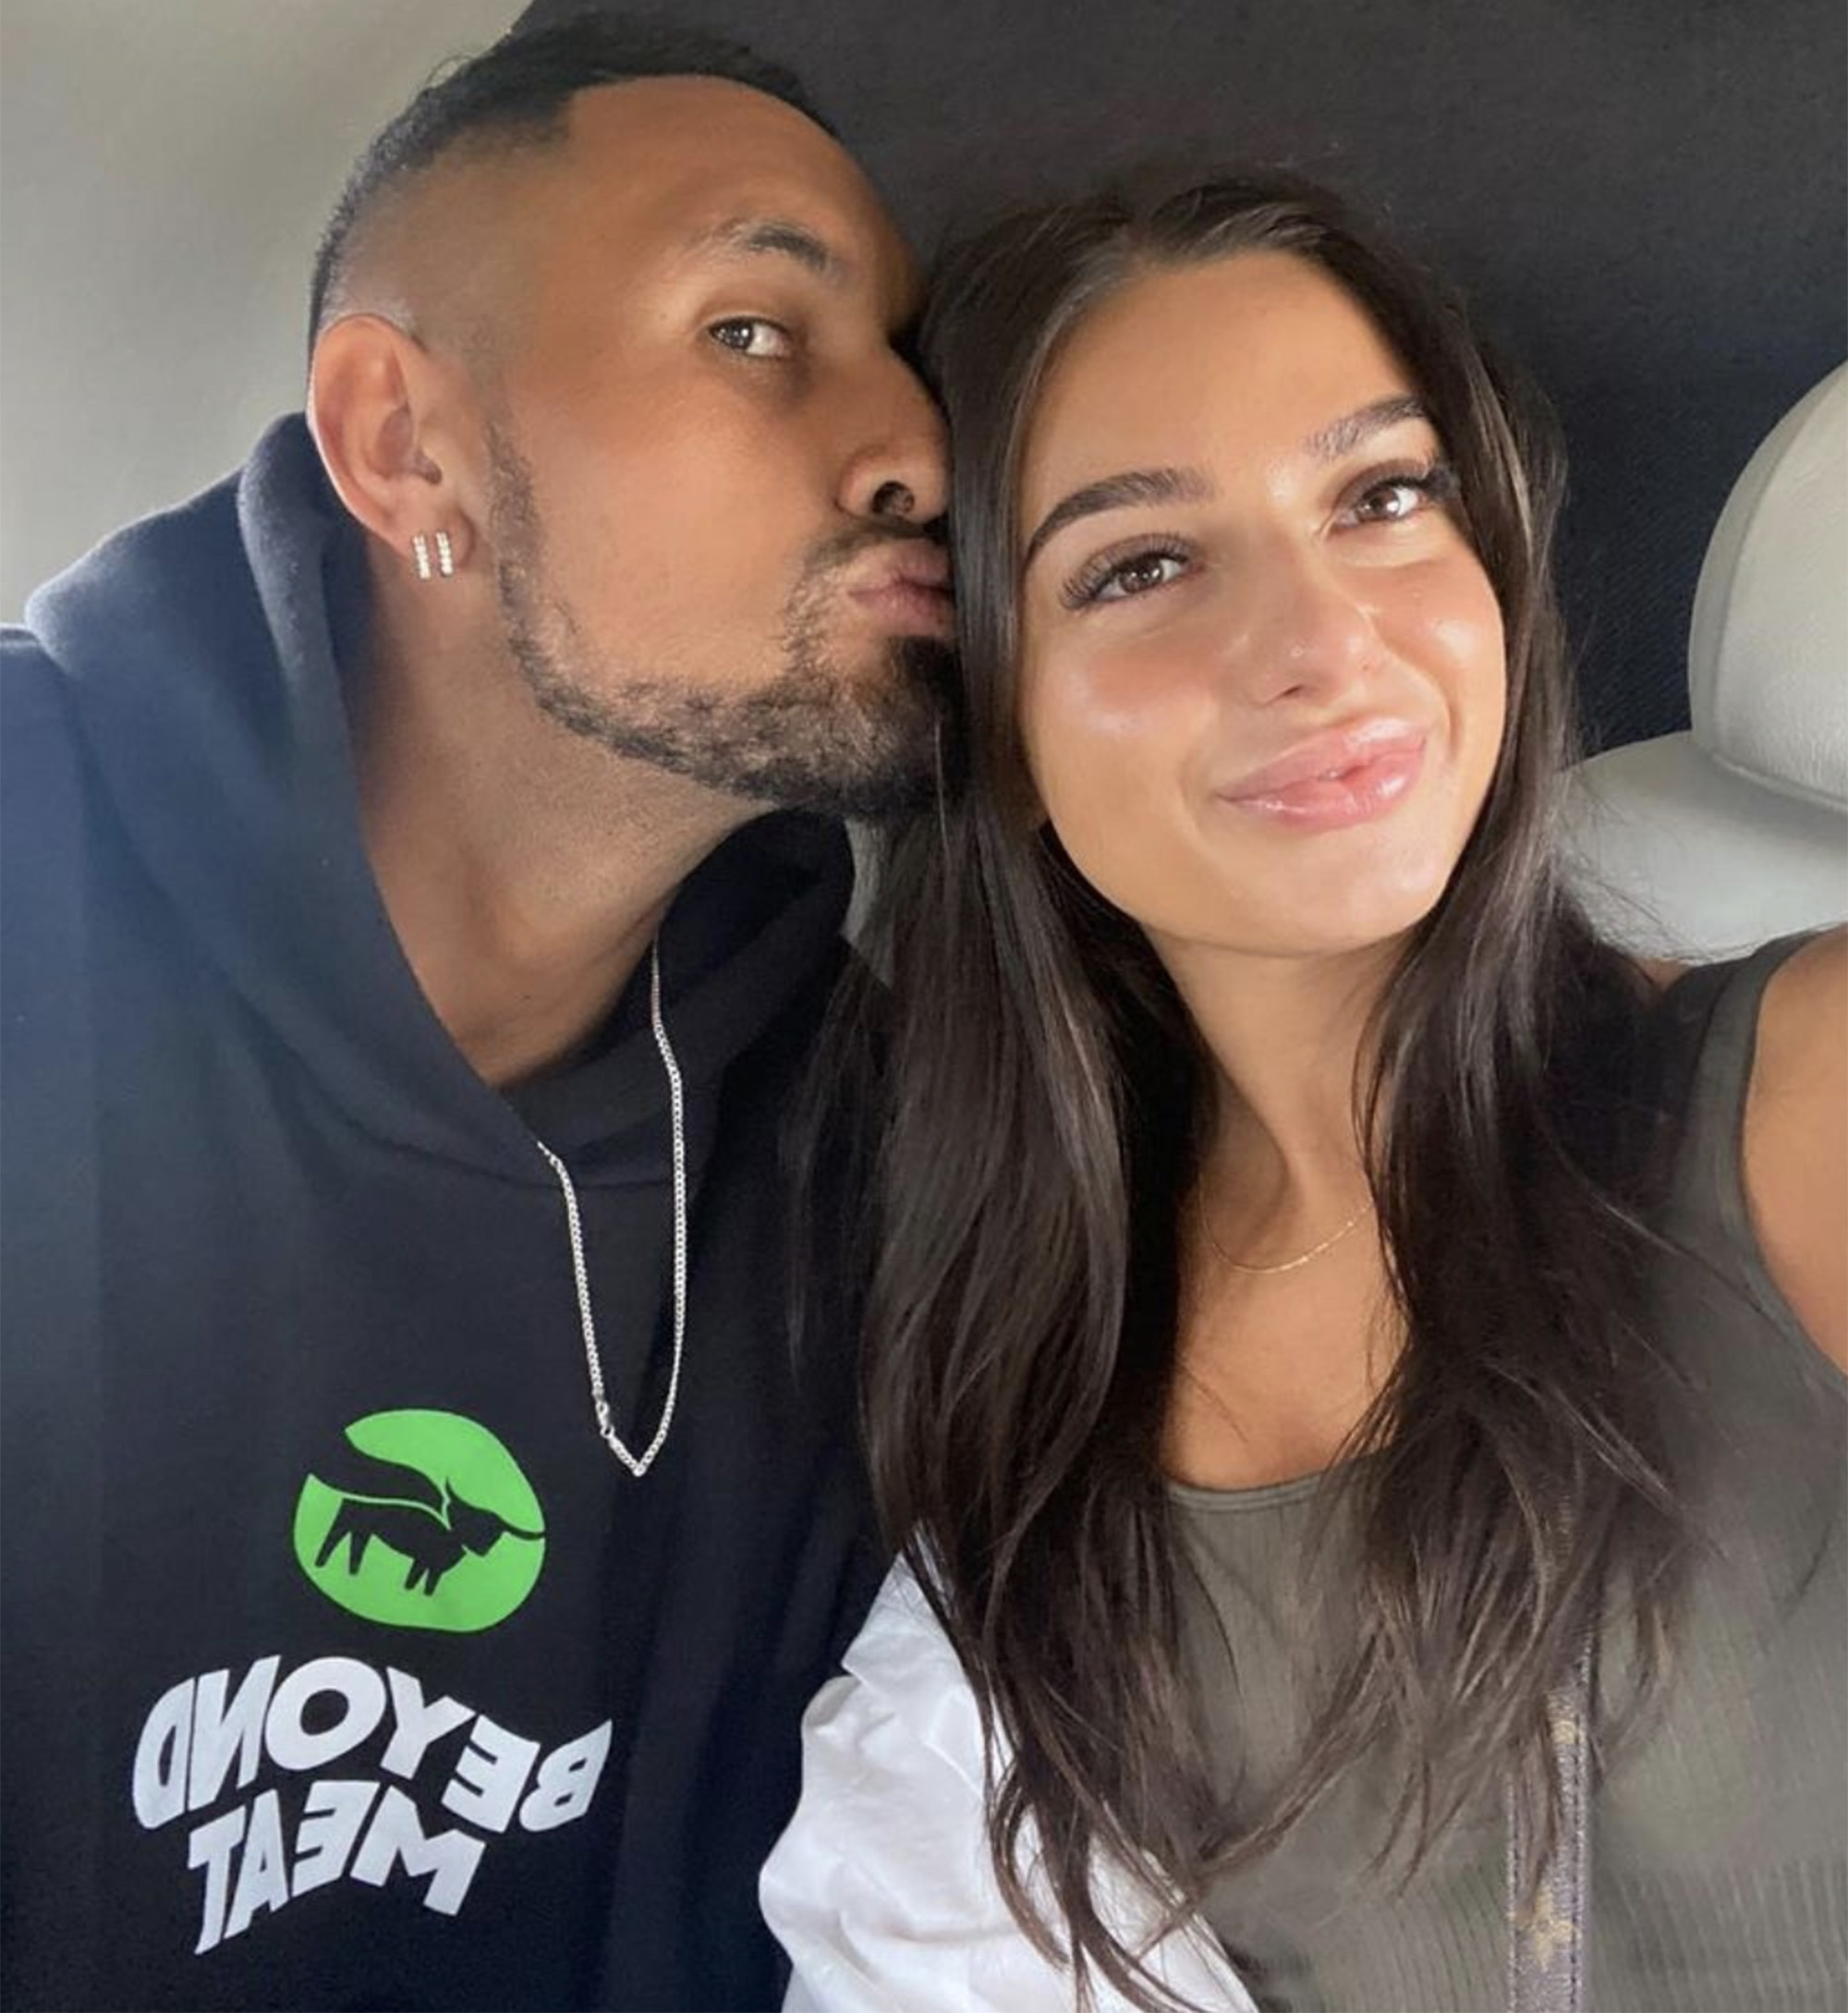 Nick Kyrgios credits girlfriend Costeen Hatzi for helping him reform both on and off the tennis court